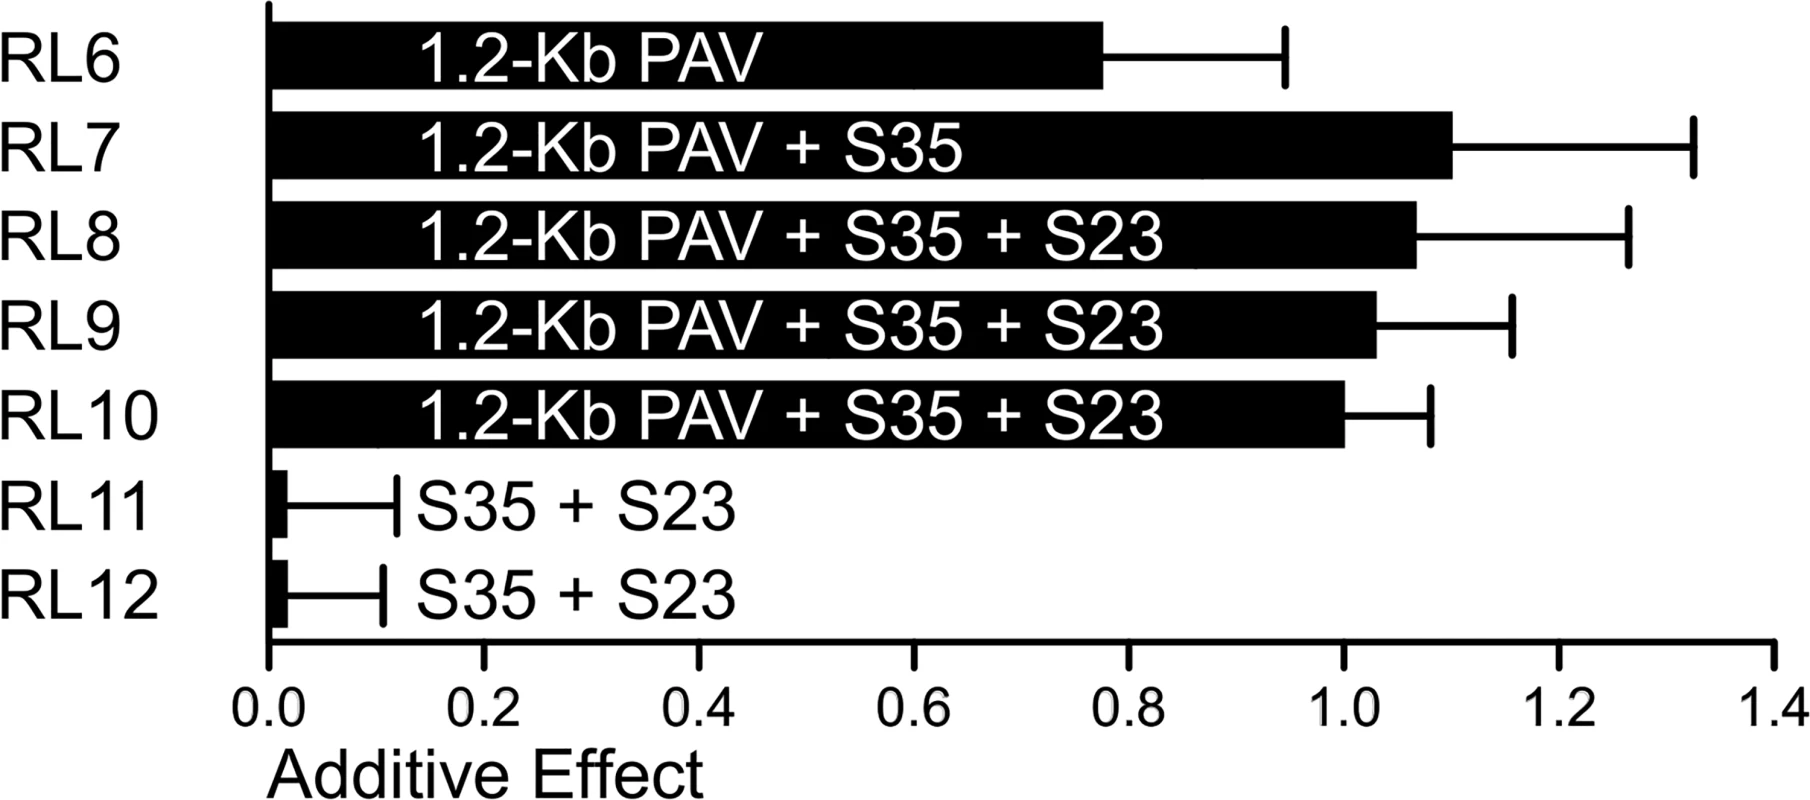 The additive effects of 1.2-Kb PAV and S35 estimated in RLs.